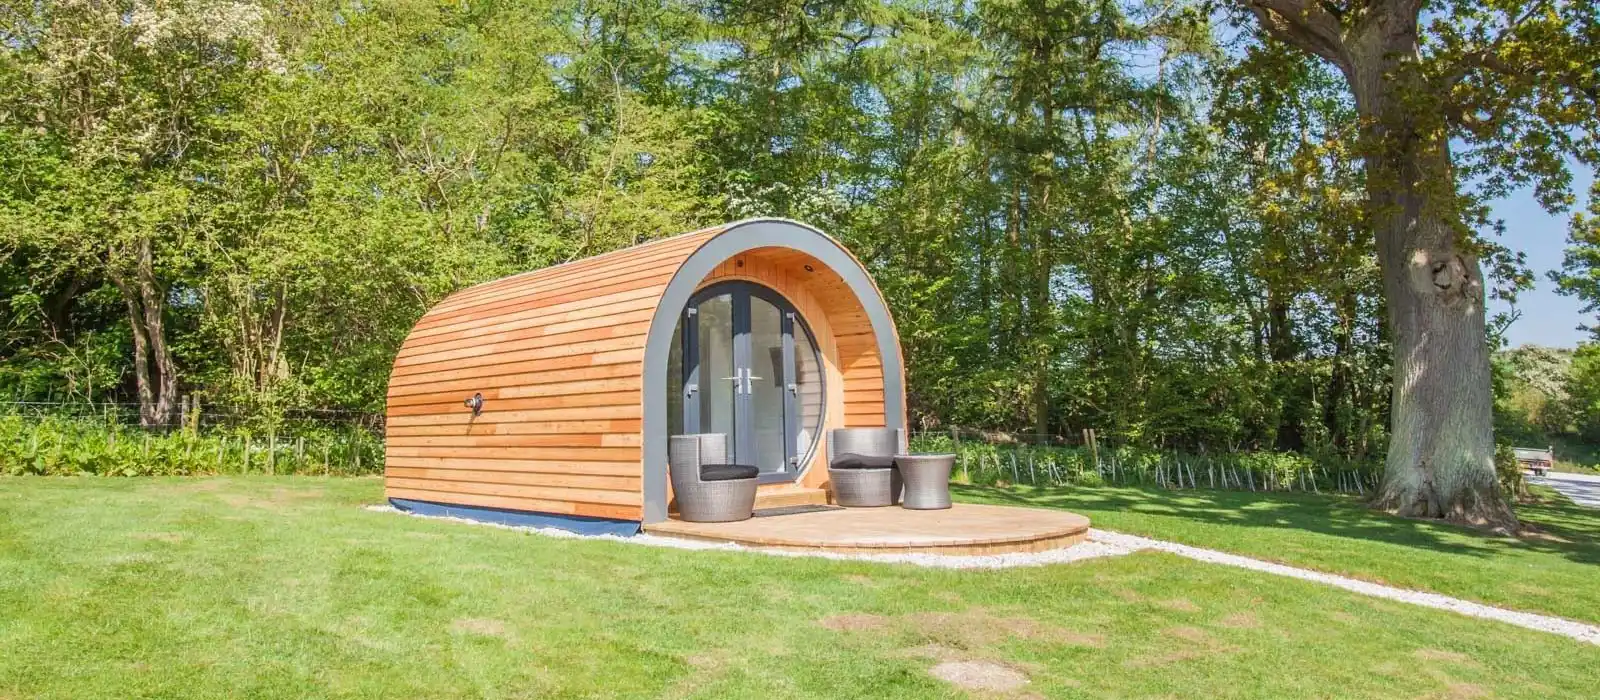 Camping and glamping pods in Pickering